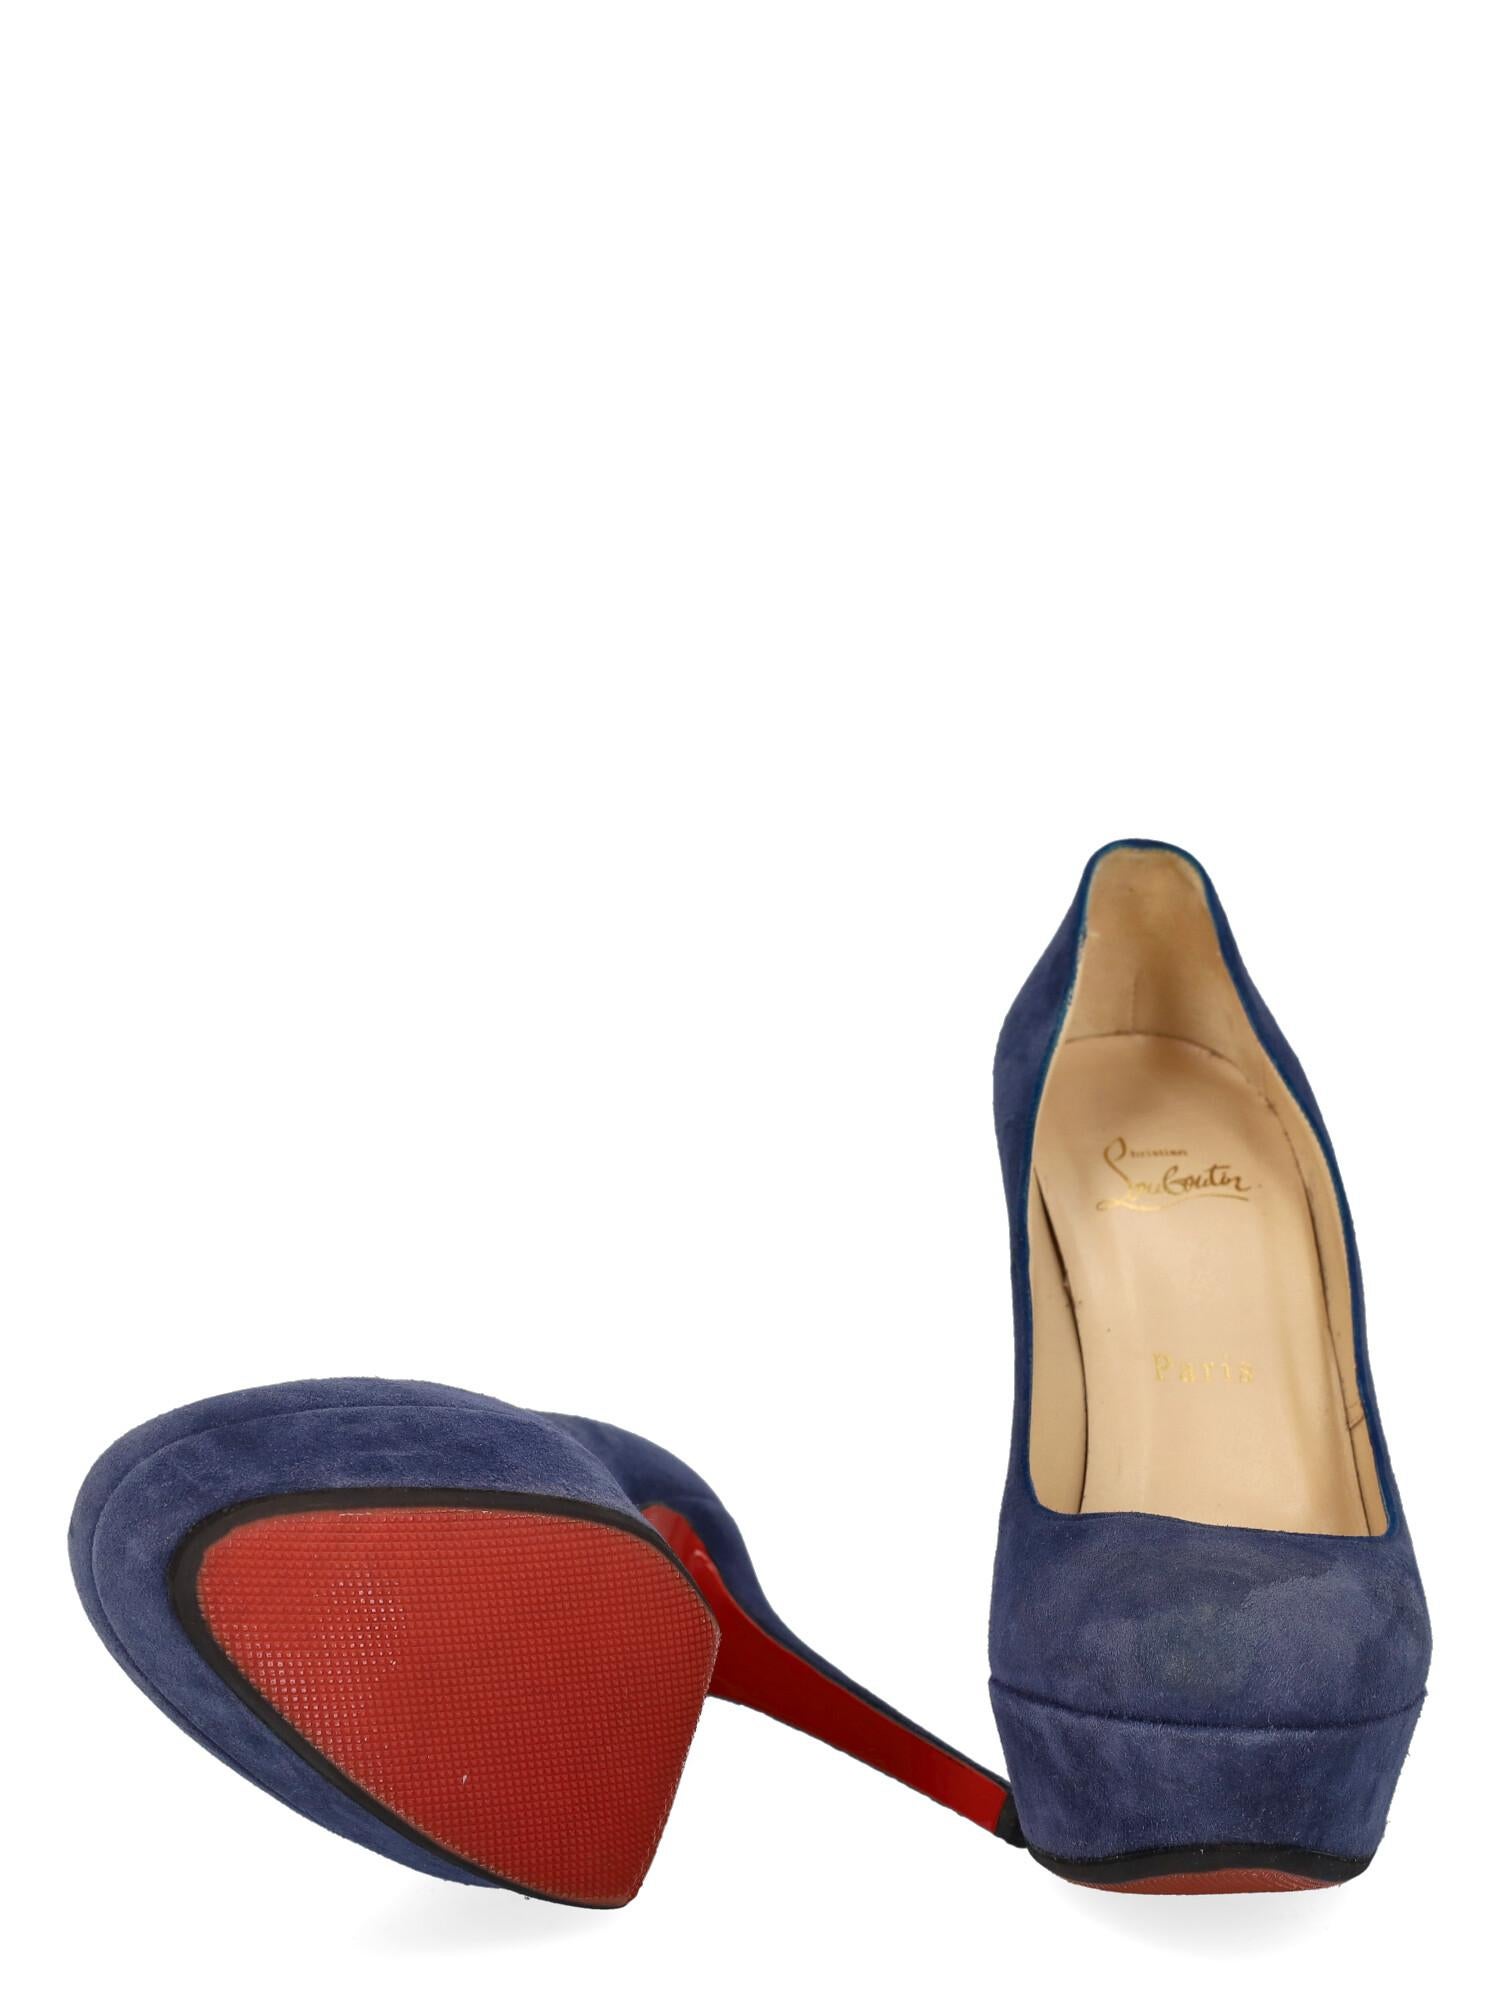 Christian Louboutin Women Pumps Navy Leather EU 38.5 In Good Condition For Sale In Milan, IT